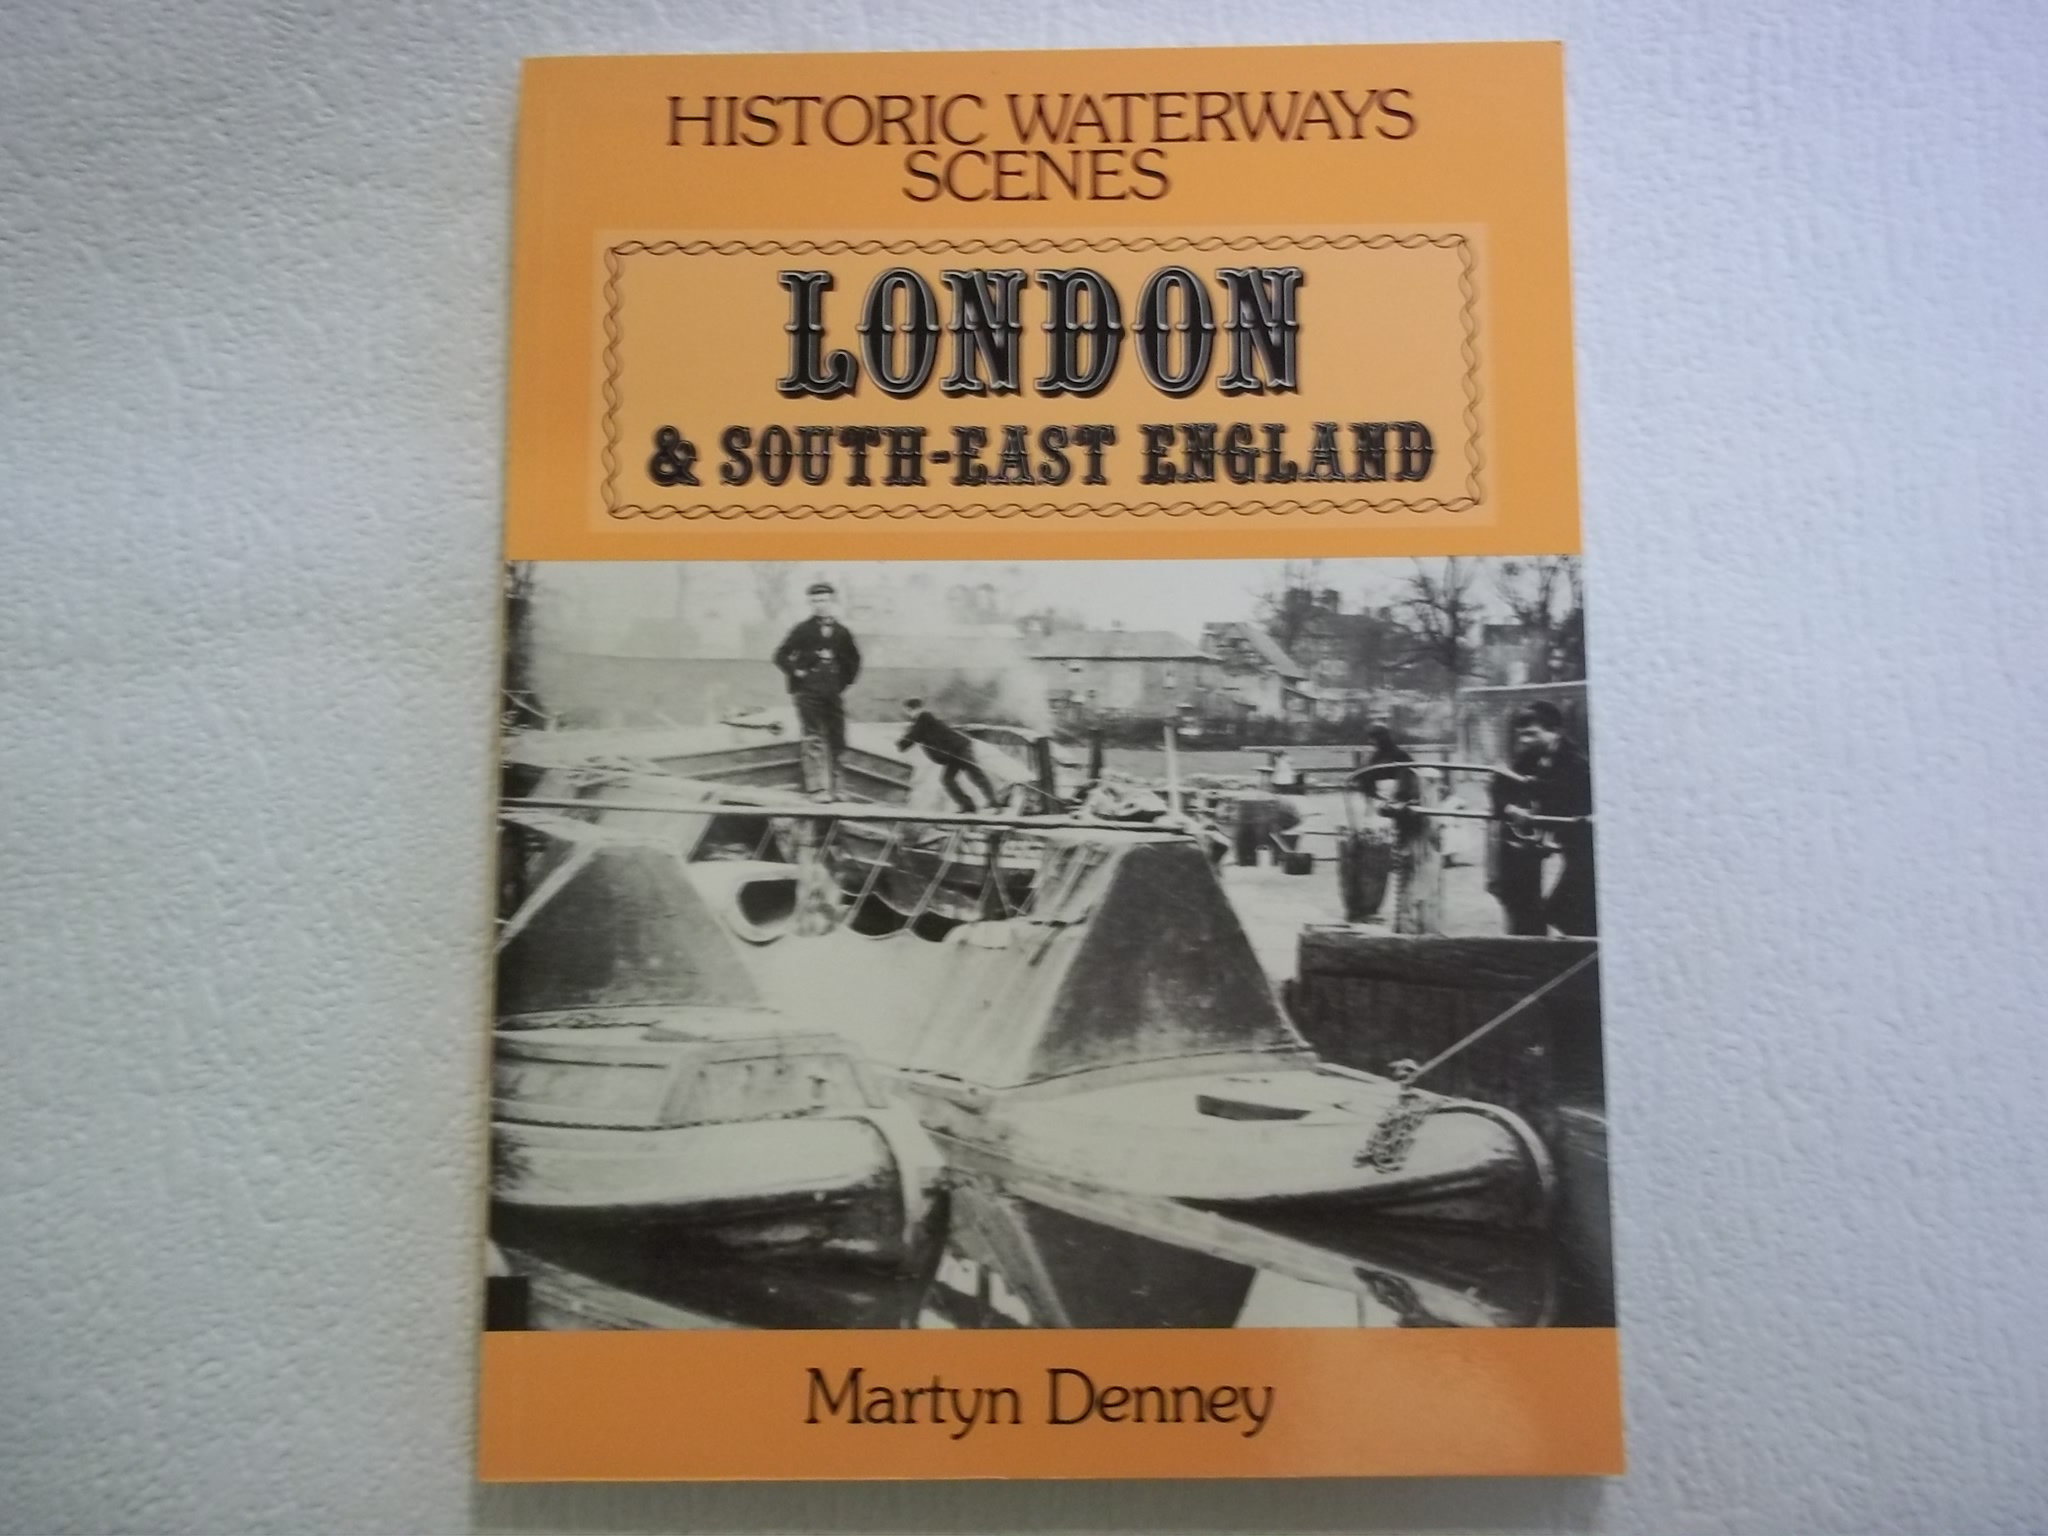 HISTORIC WATERWAYS SCENES: LONDON AND SOUTH-EAST ENGLAND. - Denney, Martyn.